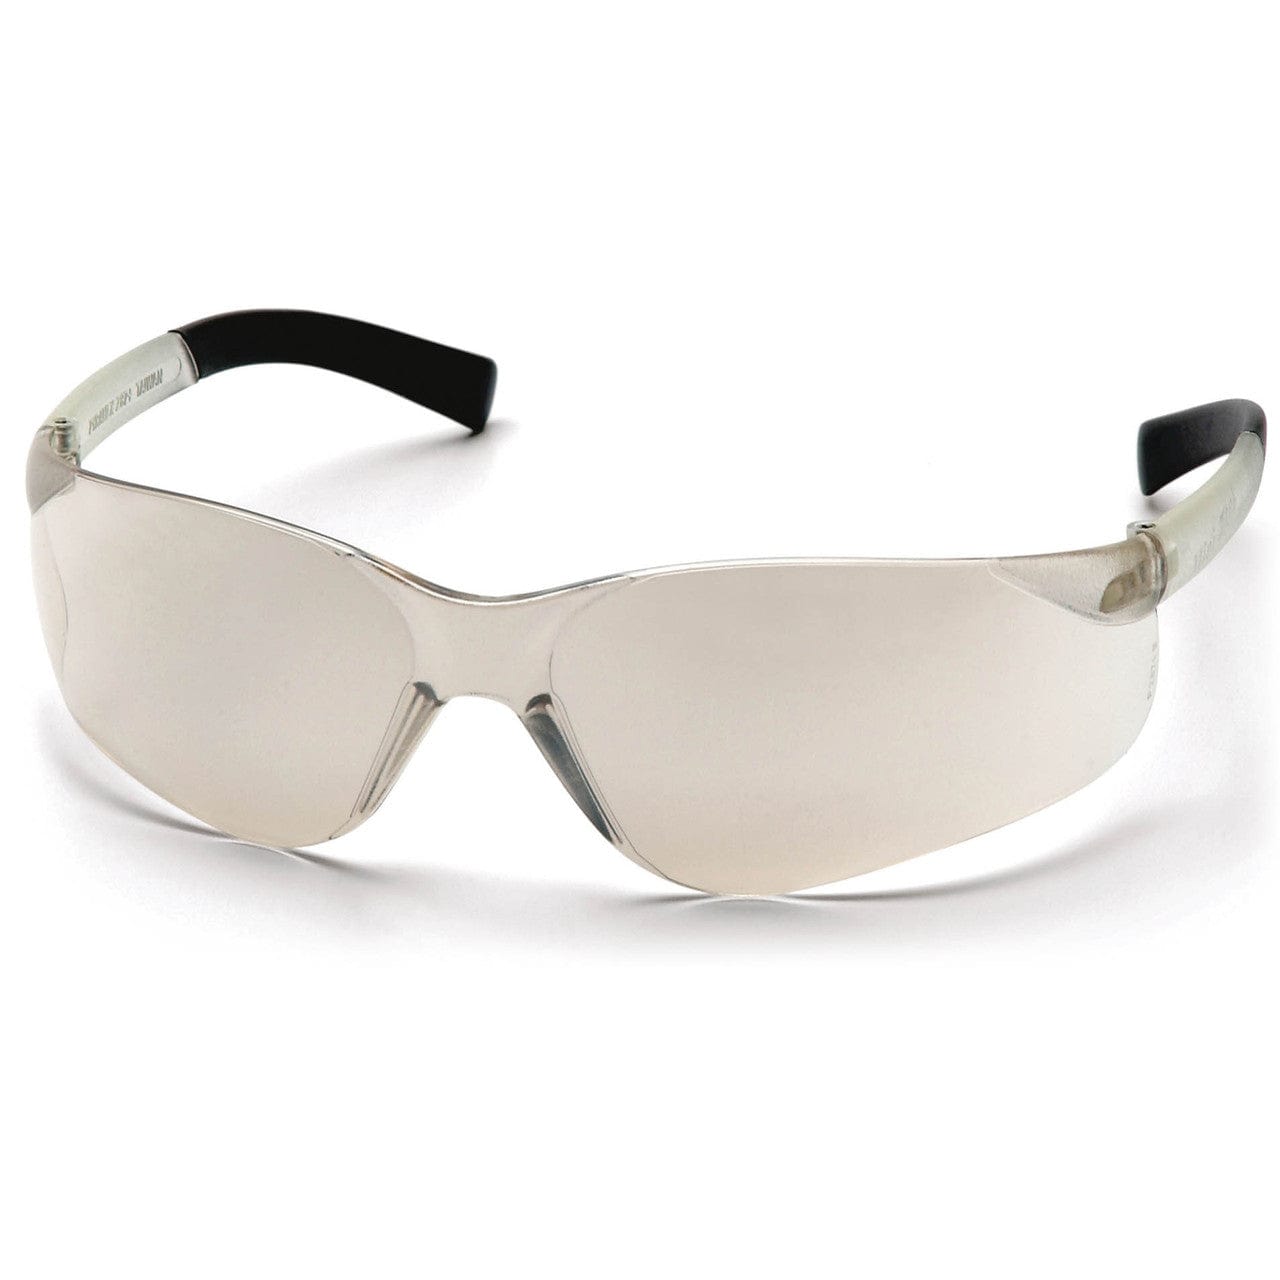 Pyramex Mini Ztek Safety Glasses with Indoor/Outdoor Lens S2580SN